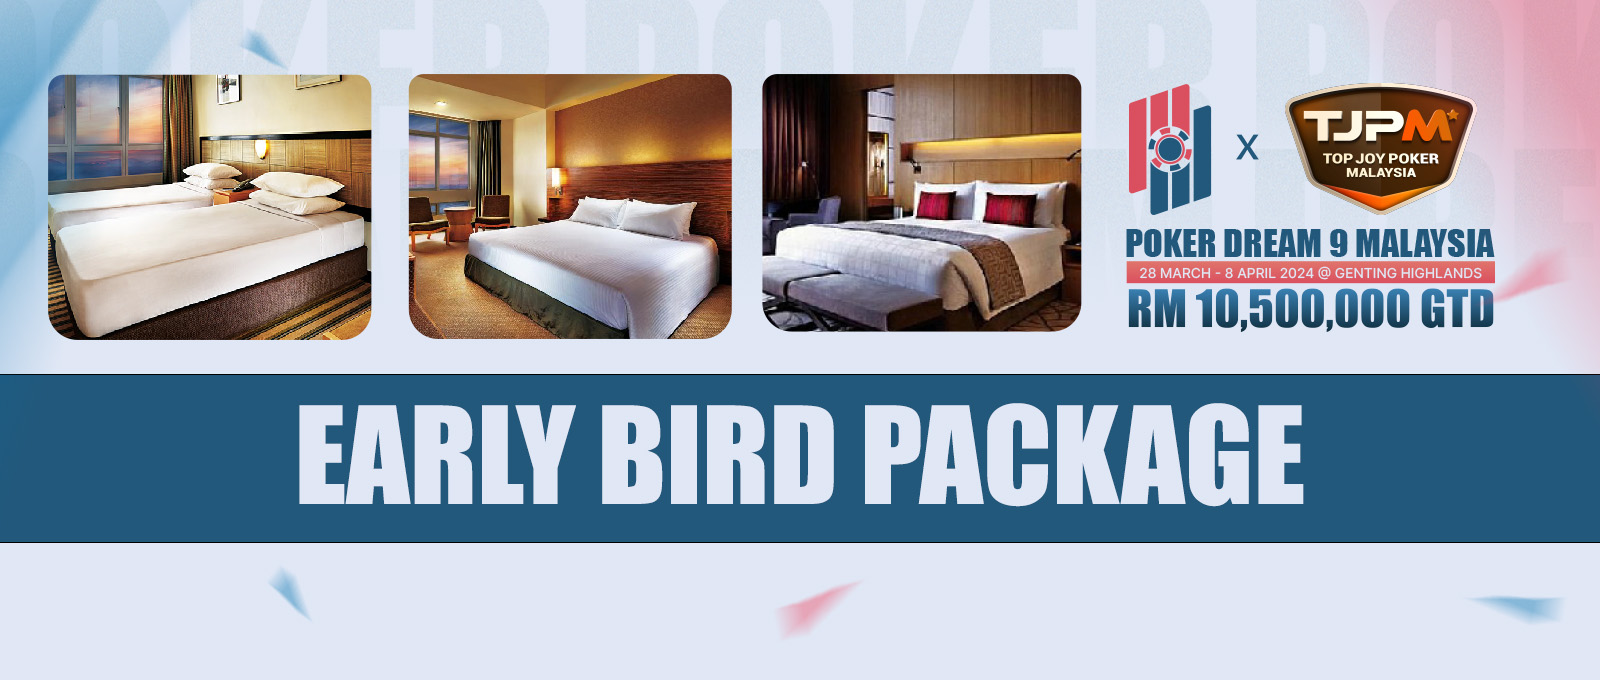 Poker Dream 9 Malaysia Main Event Early Bird Package